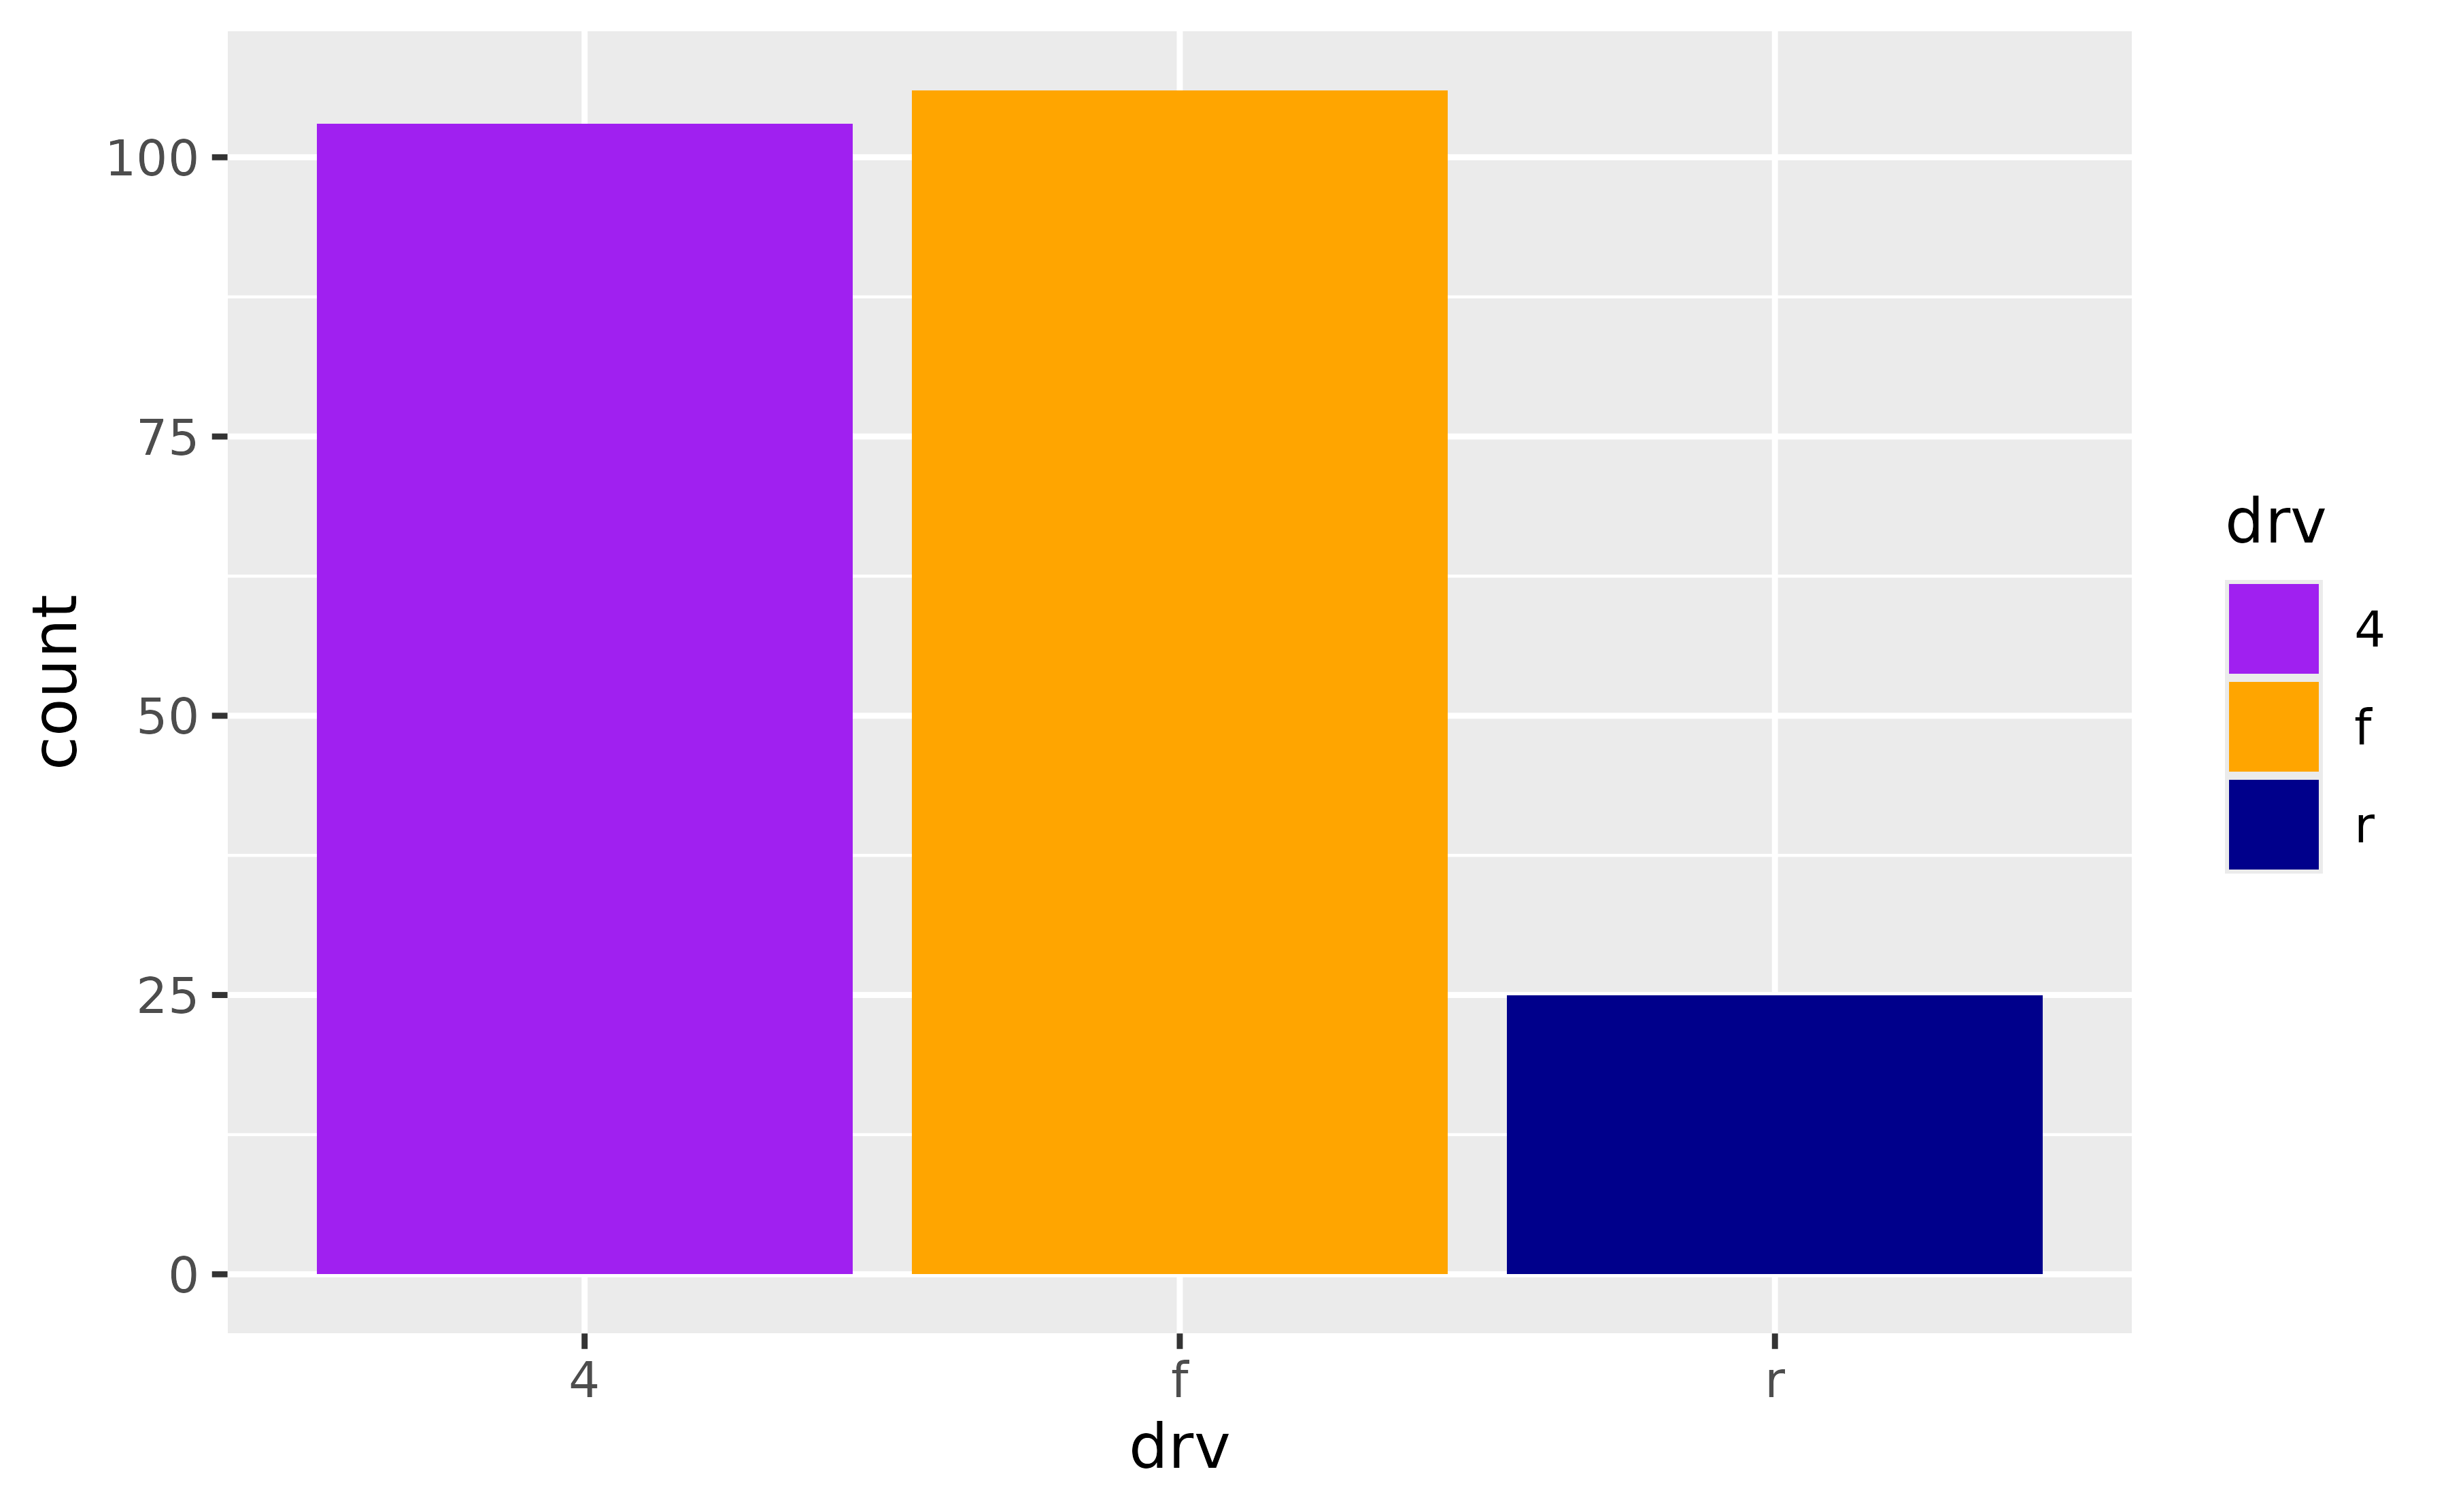 A bar chart showing the number of cars for each of three types of drive train. From left-to-right, the bars are purple, orange and dark blue.